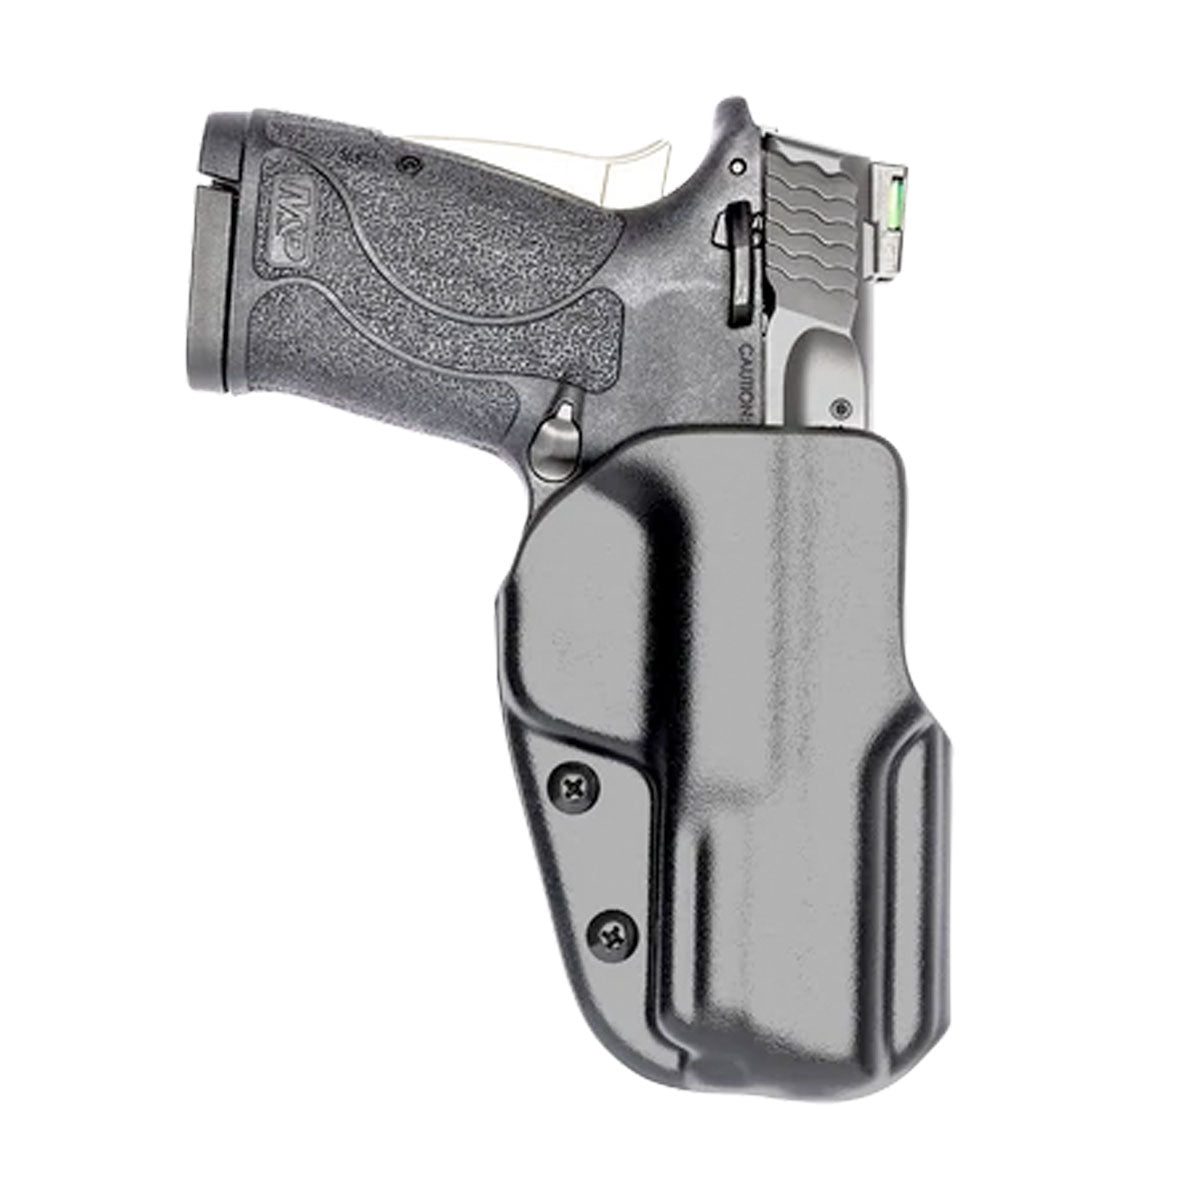 Blade-Tech Classic OWB Holsters Black Holsters Blade-Tech Holsters S&W Shield 9/40 Right Hand Tactical Gear Supplier Tactical Distributors Australia